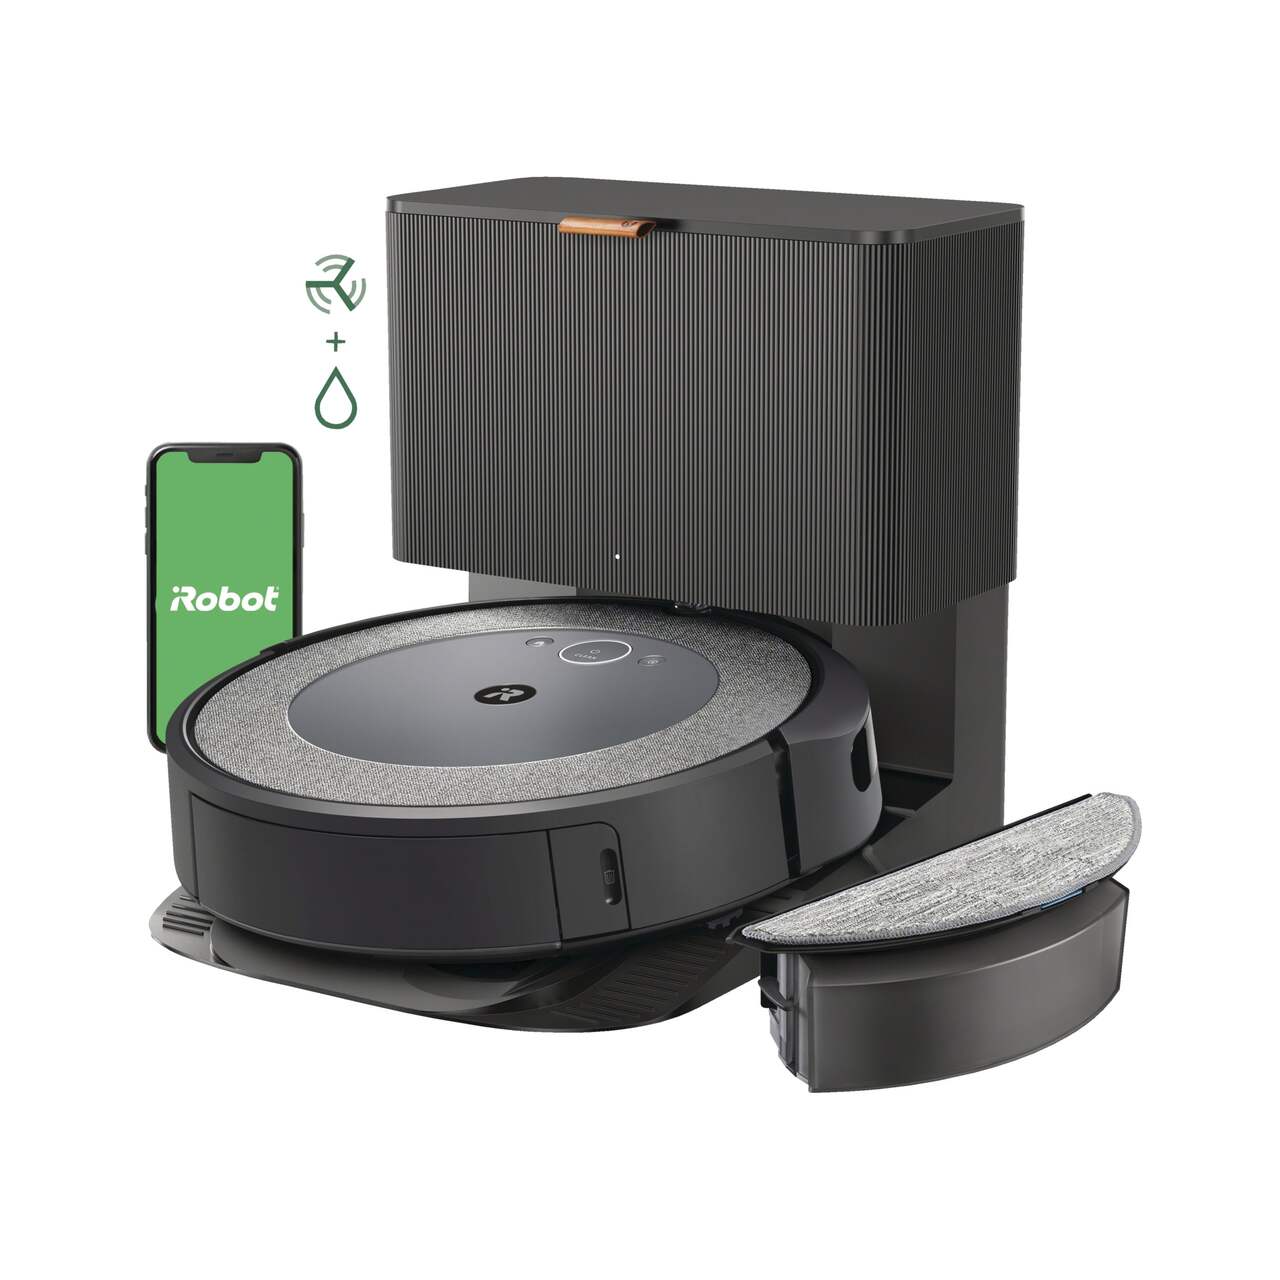 https://media-www.canadiantire.ca/product/living/cleaning/vacuums-and-floorcare/0437182/irobot-roomba-combo-i5-robot-vacuum-90b027f2-9a0c-436b-8c9b-fb5277c9ce28-jpgrendition.jpg?imdensity=1&imwidth=640&impolicy=mZoom